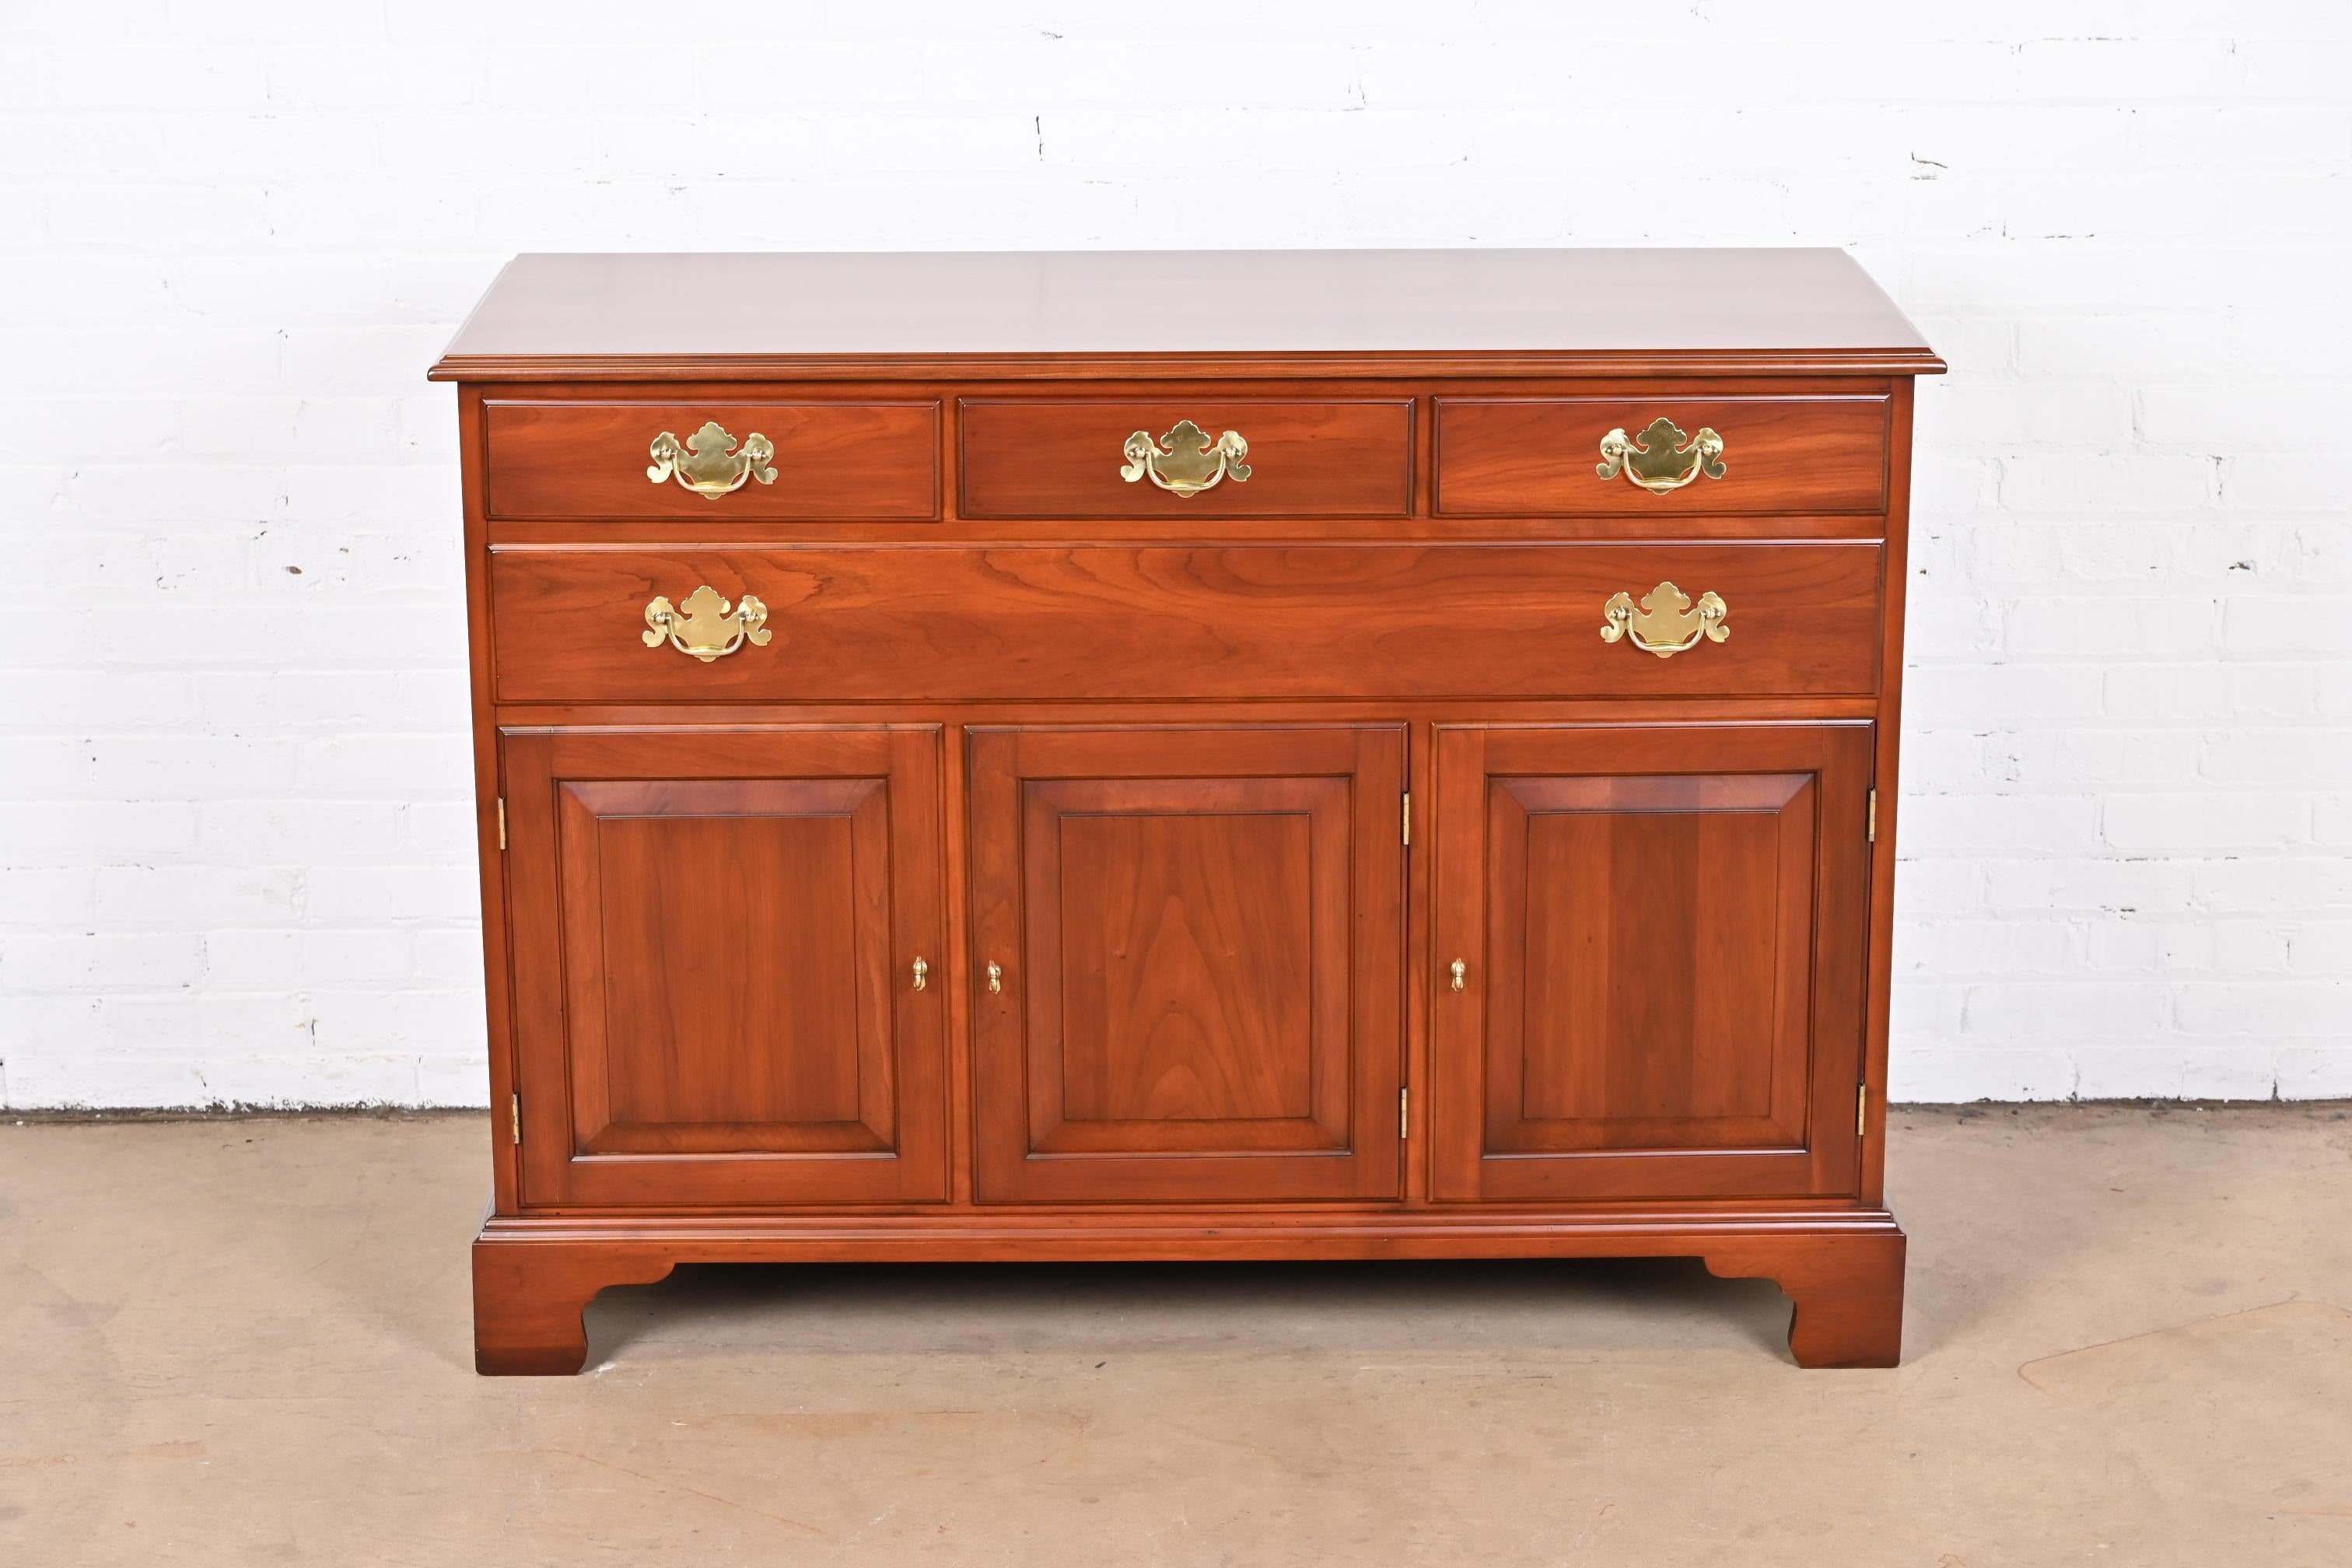 A gorgeous American Colonial or Chippendale style sideboard, buffet server, or bar cabinet

By Henkel Harris

USA, 1970

Solid wild black cherry wood, with original brass hardware.

Measures: 50